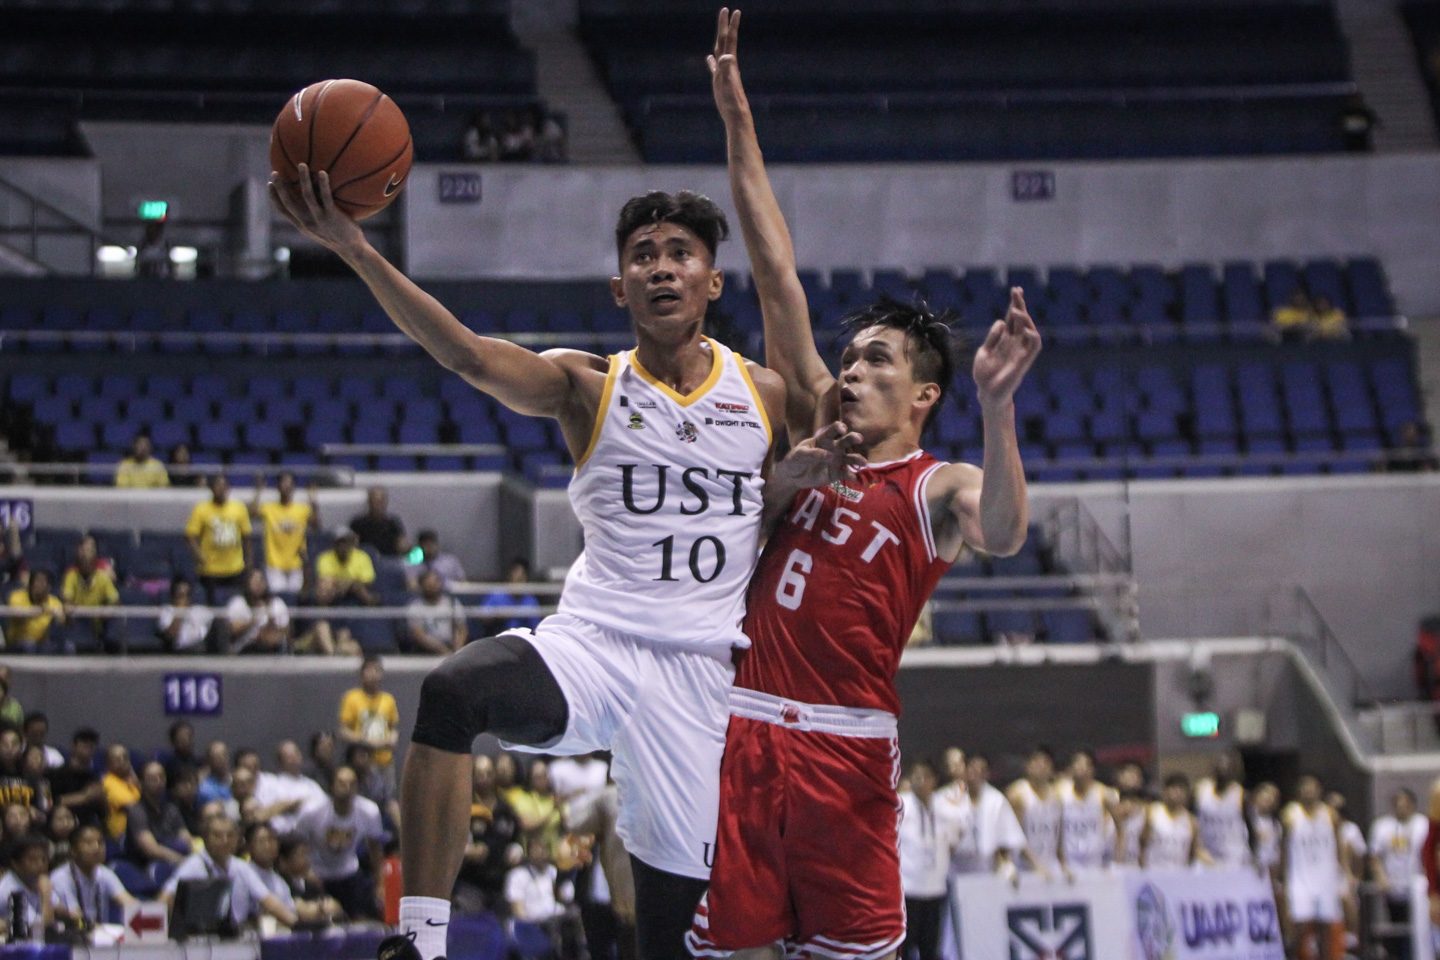 ‘Probinsyano connection’ brings UST star rookie Abando to Ayo